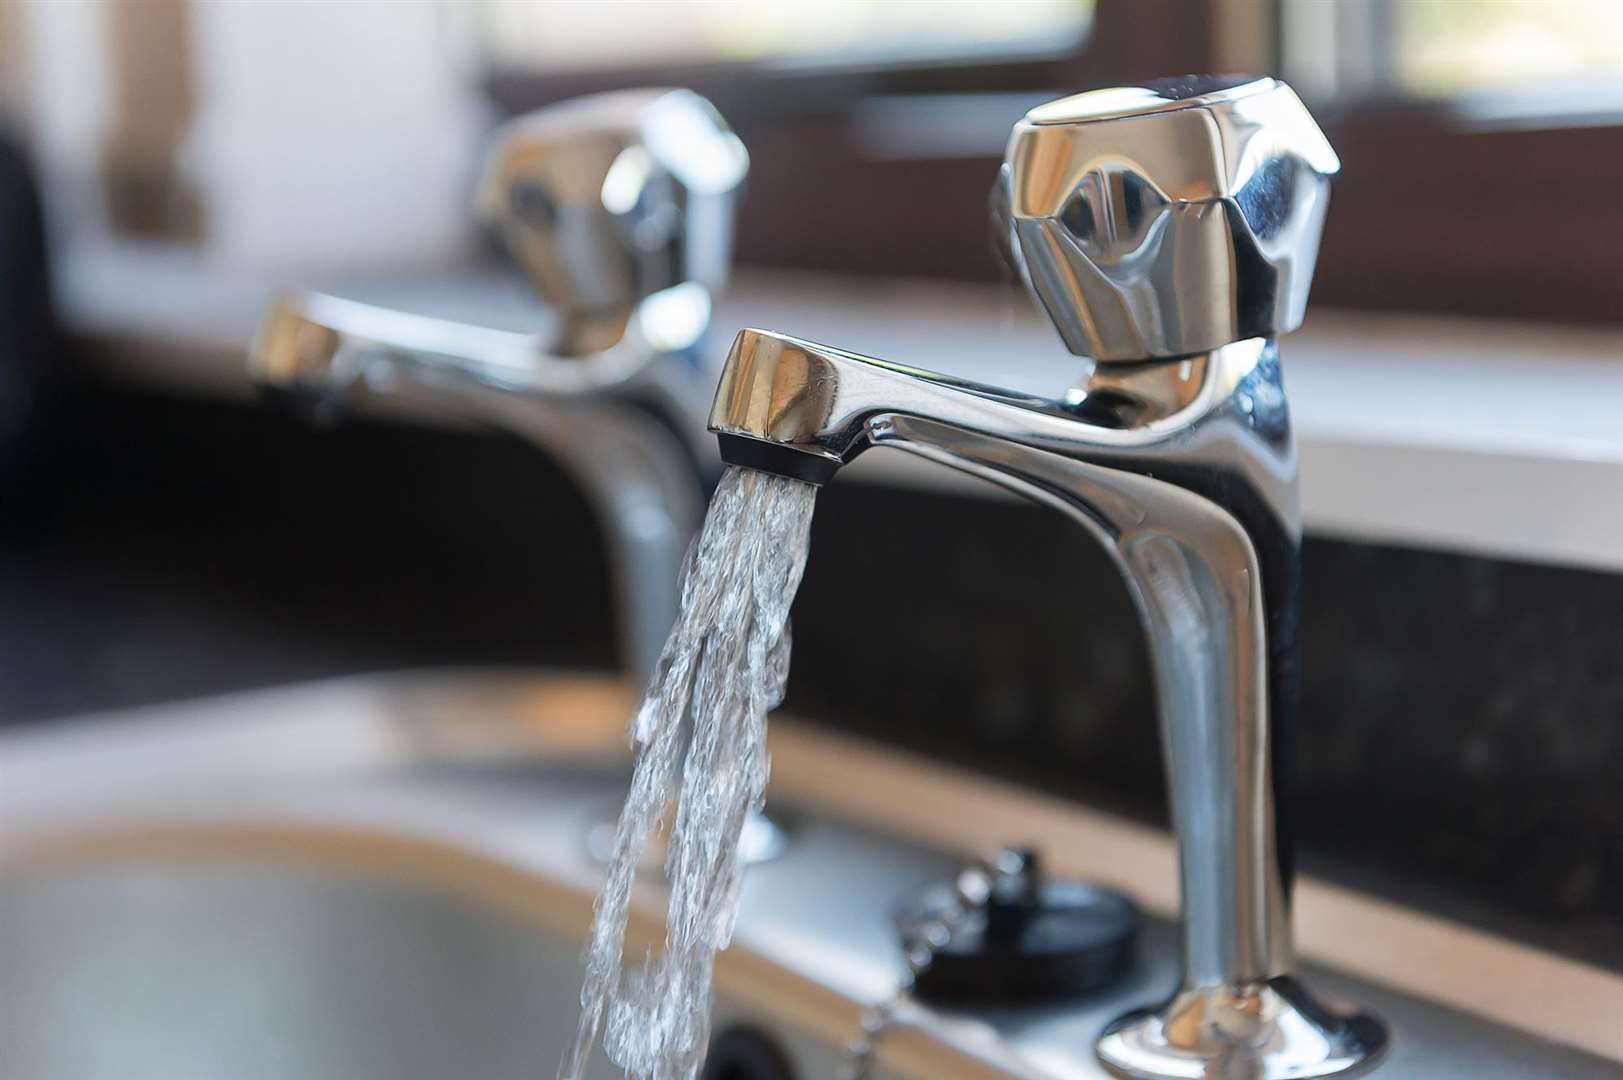 Water supply cuts have impacted many Nairn households and businesses.